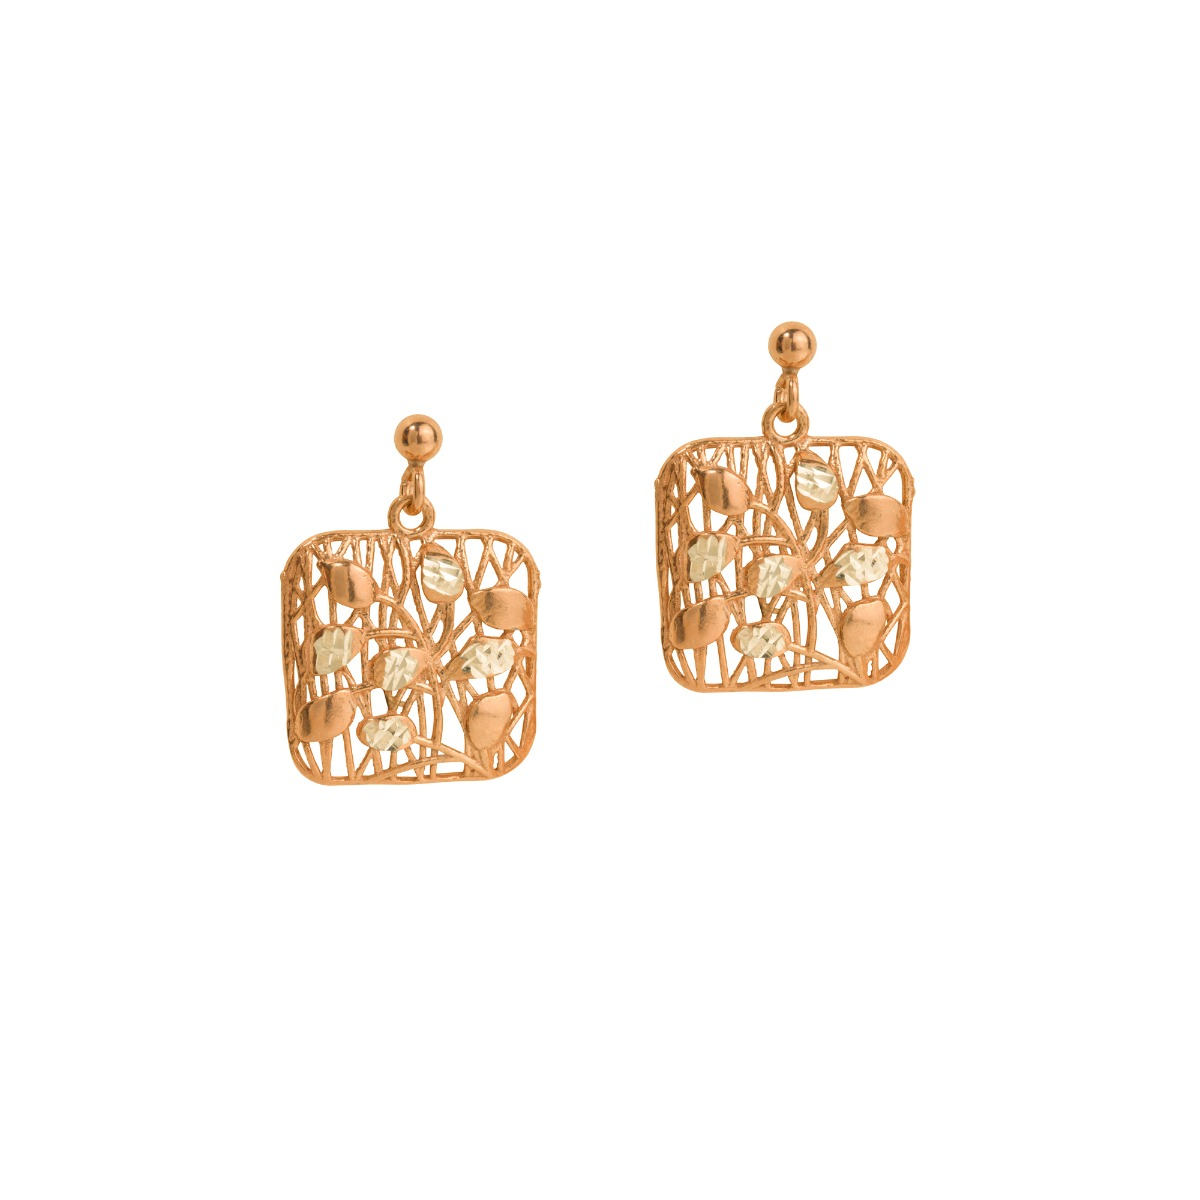 Contemporary Square Net Earrings in Yellow Silver with Diamond Effect